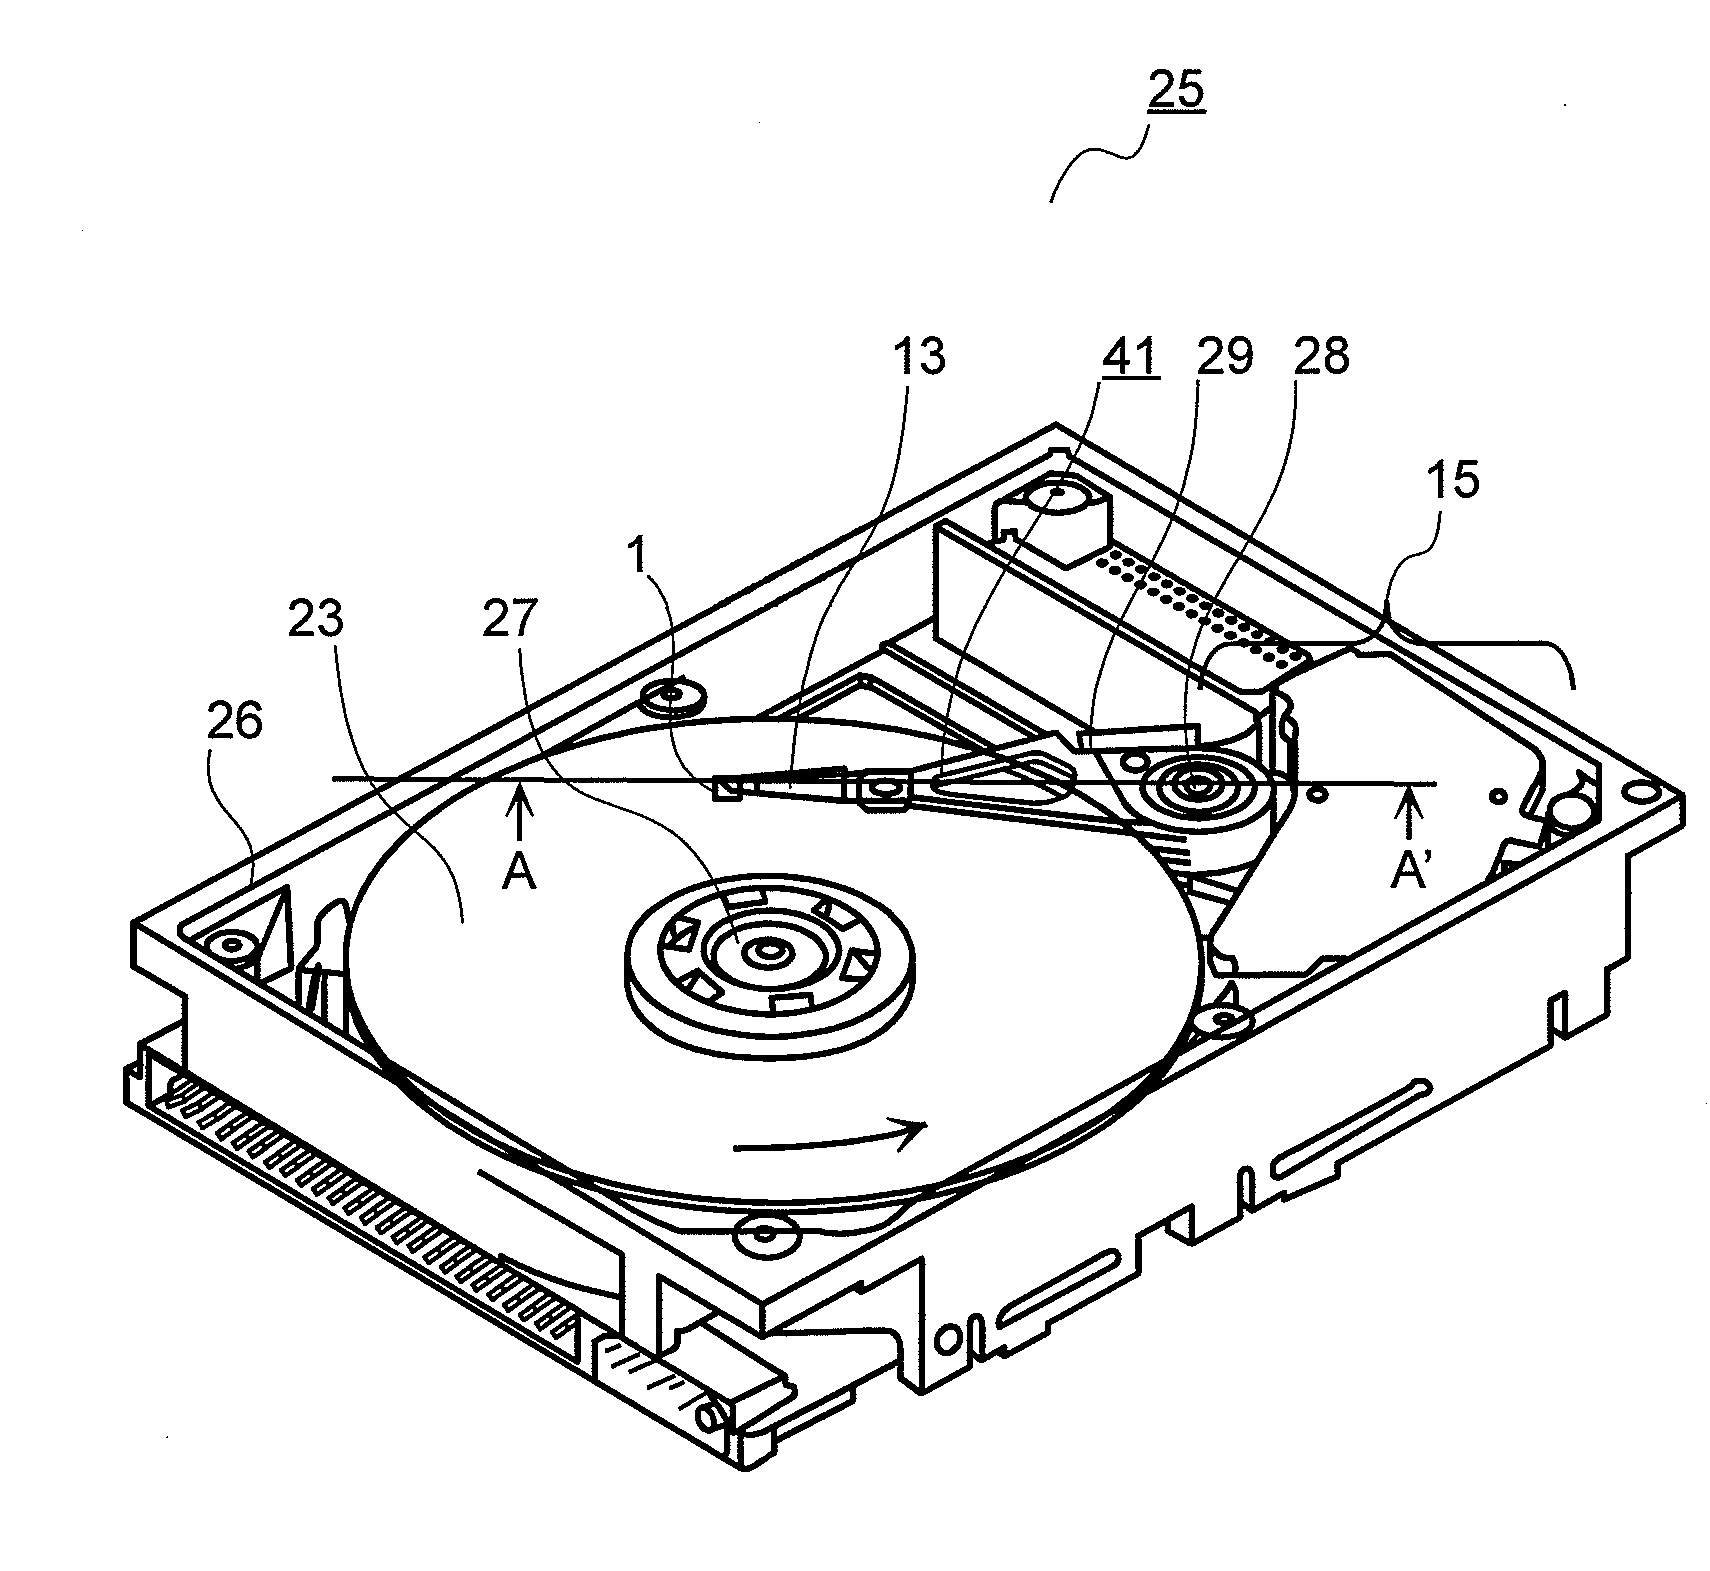 Head stack assembly and information recording apparatus